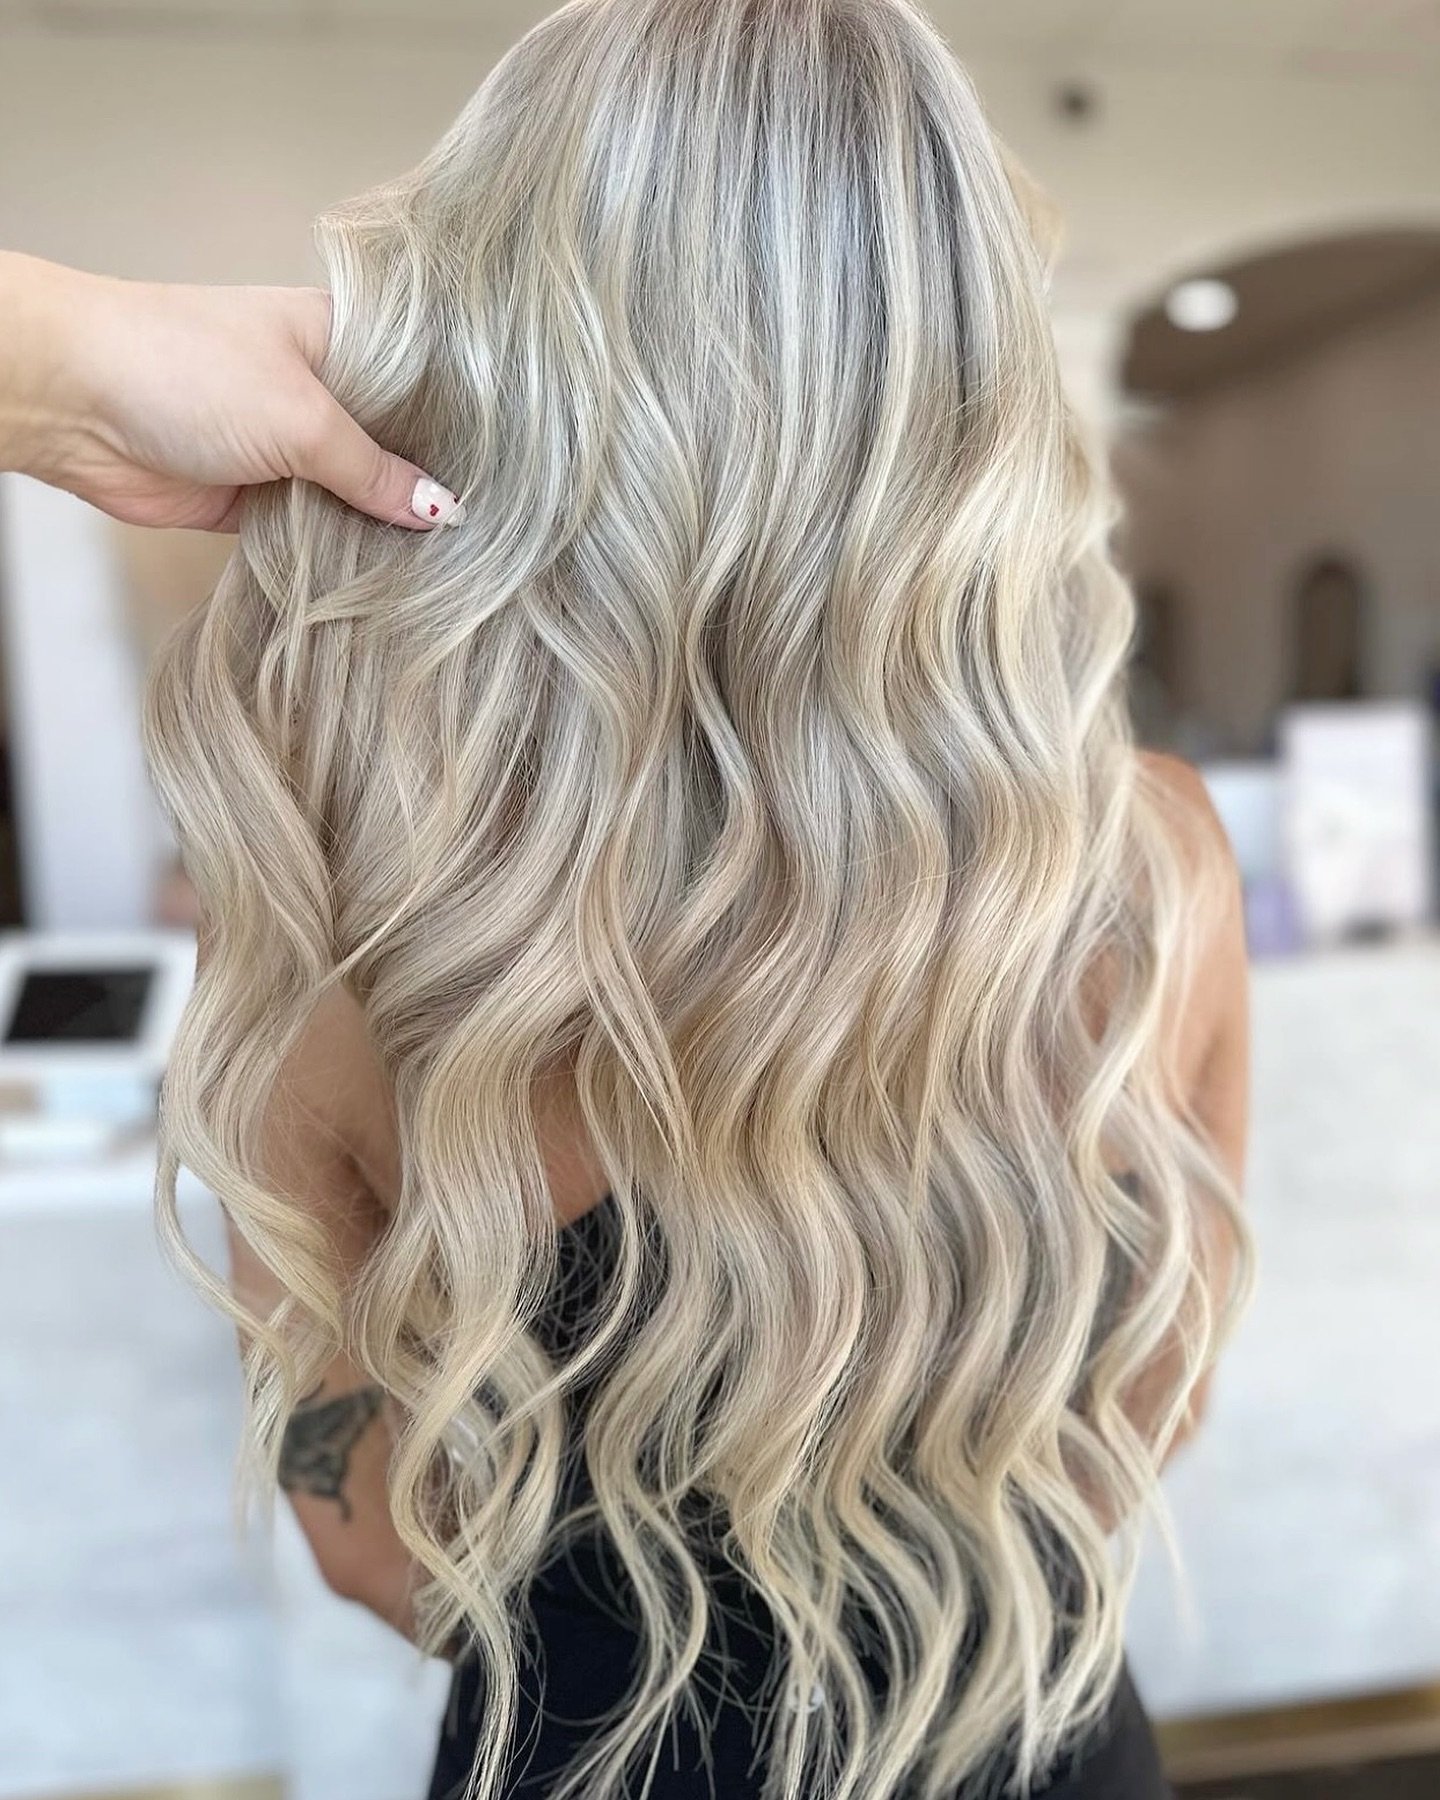 We love helping you go brighter for summer ☀️

Hair by Dominique

This month, buy two Redken hairsprays for $42. To make an appointment, give us a call at 517.225.5958 or book online at district308.com/book

.
.
.
.
.
Howell, Brighton, Pinckney, Hart